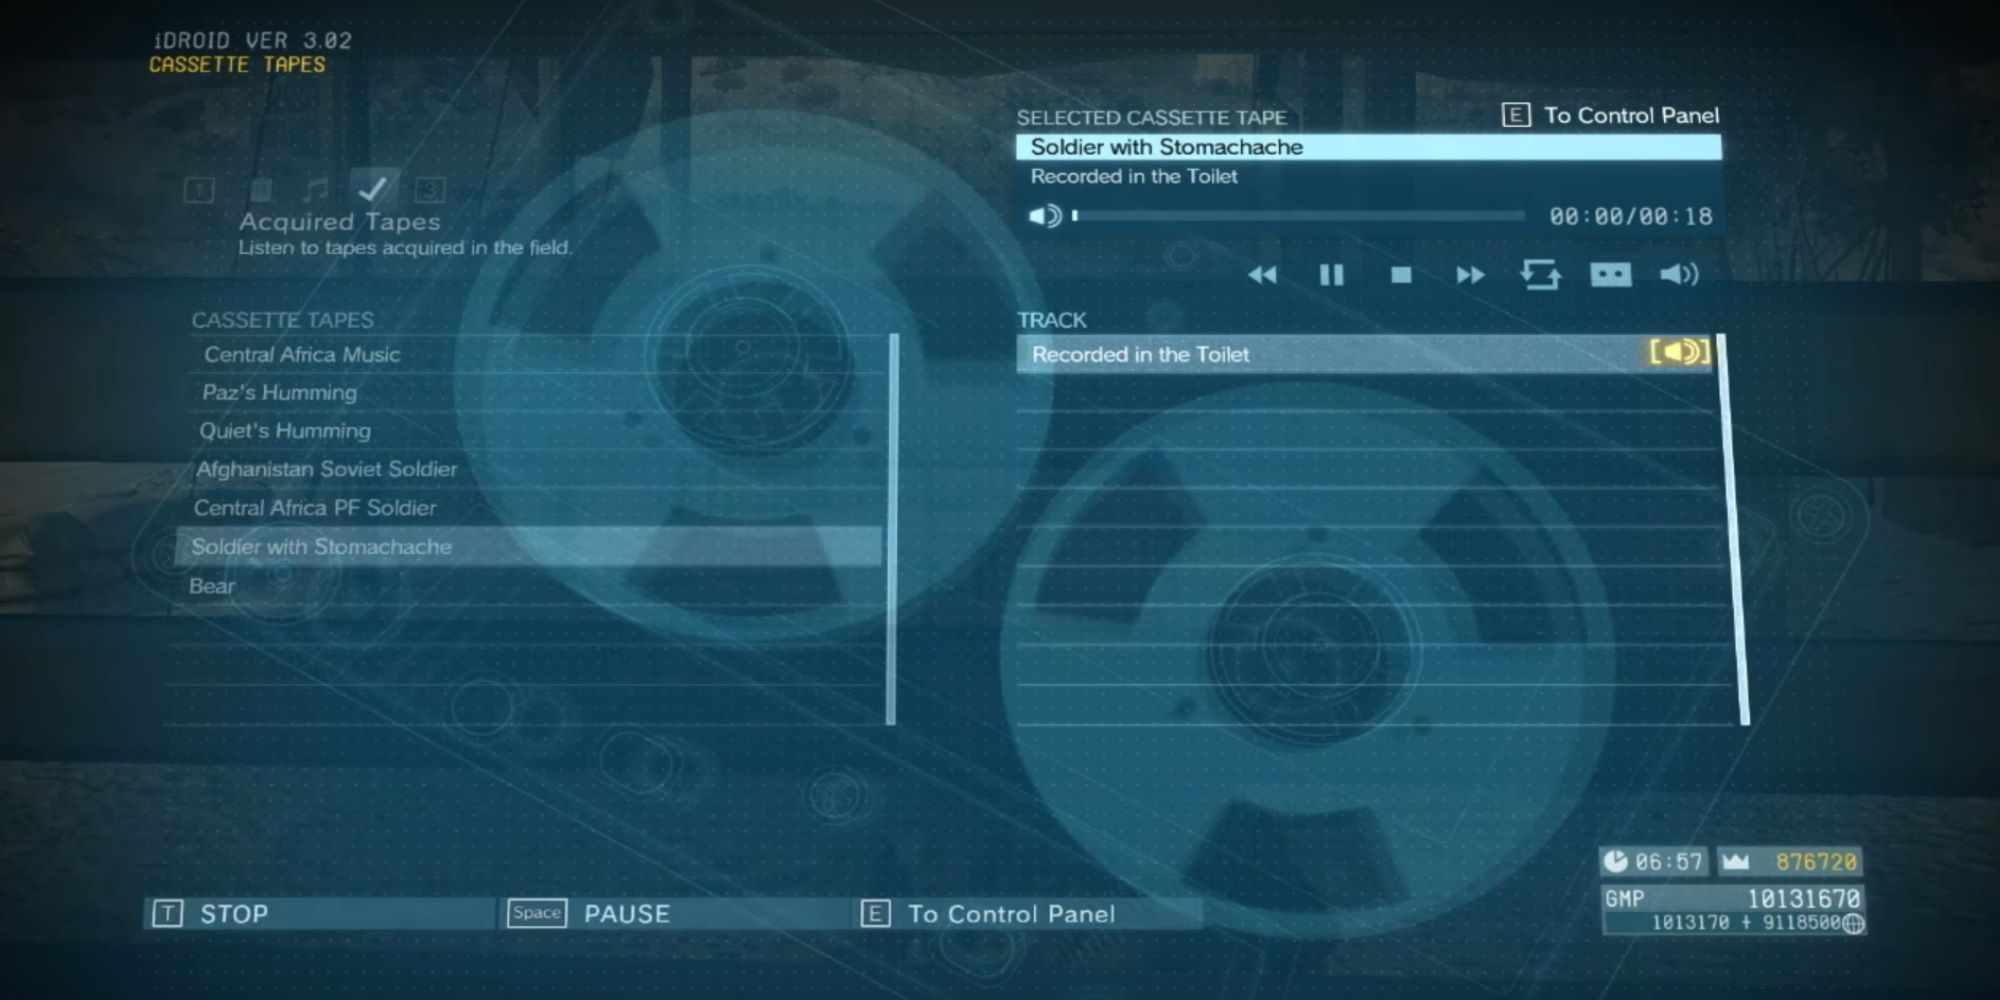 Tape recorder menu showing different recordings available to hear